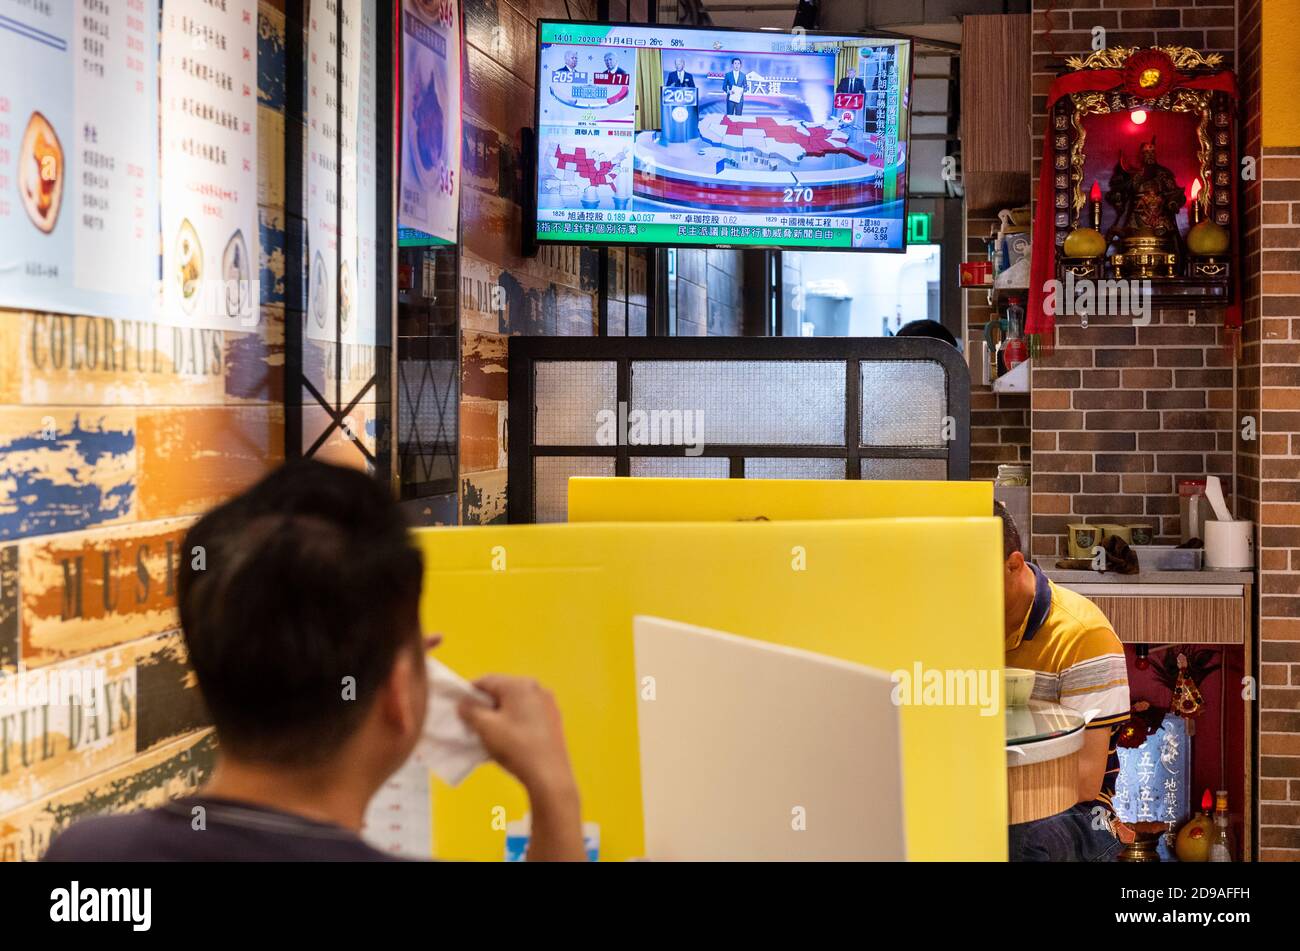 At a local restaurant, people eat and watch TV during news report about the US presidential election. Stock Photo